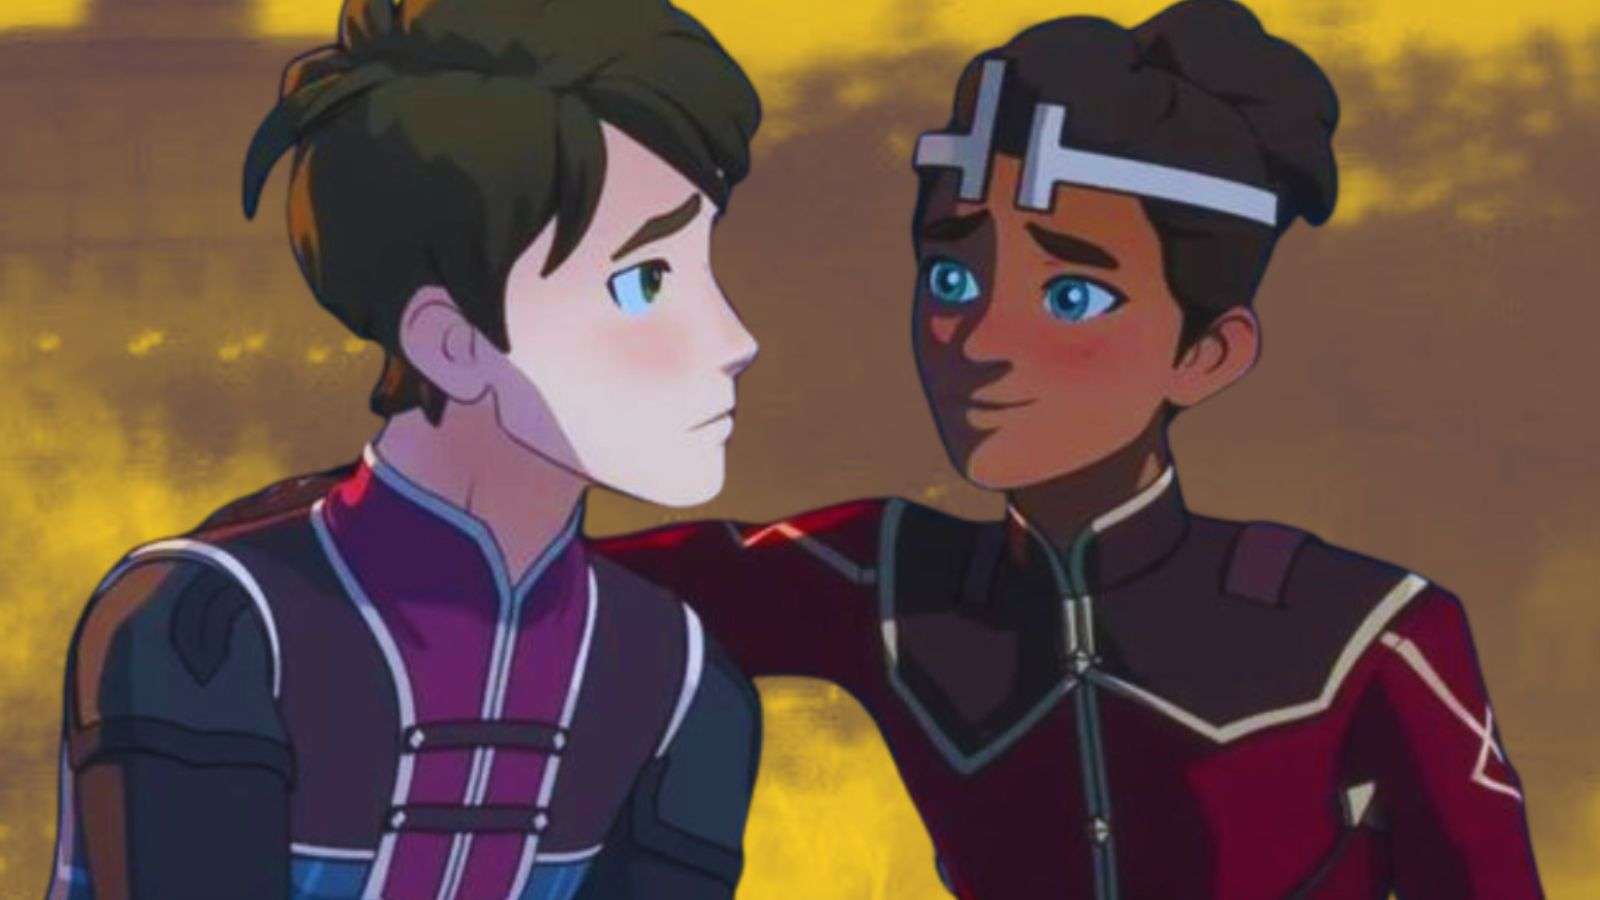 A still from The Dragon prince